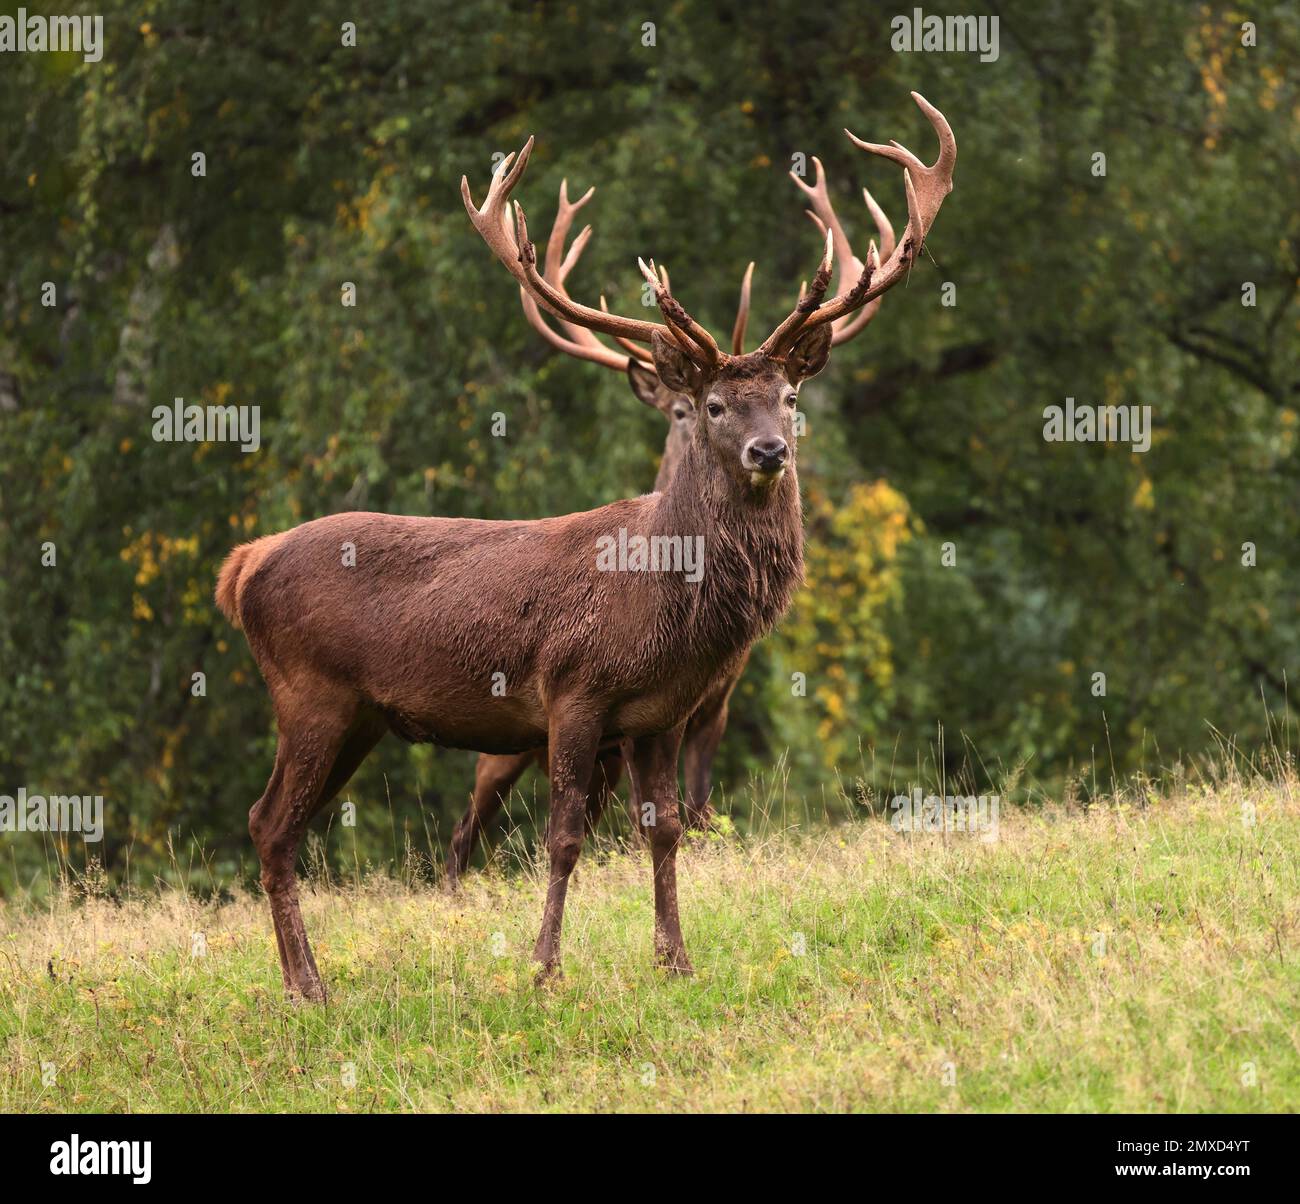 red deer (Cervus elaphus), red deer stags standing in a forest clearing in autumn, Germany Stock Photo